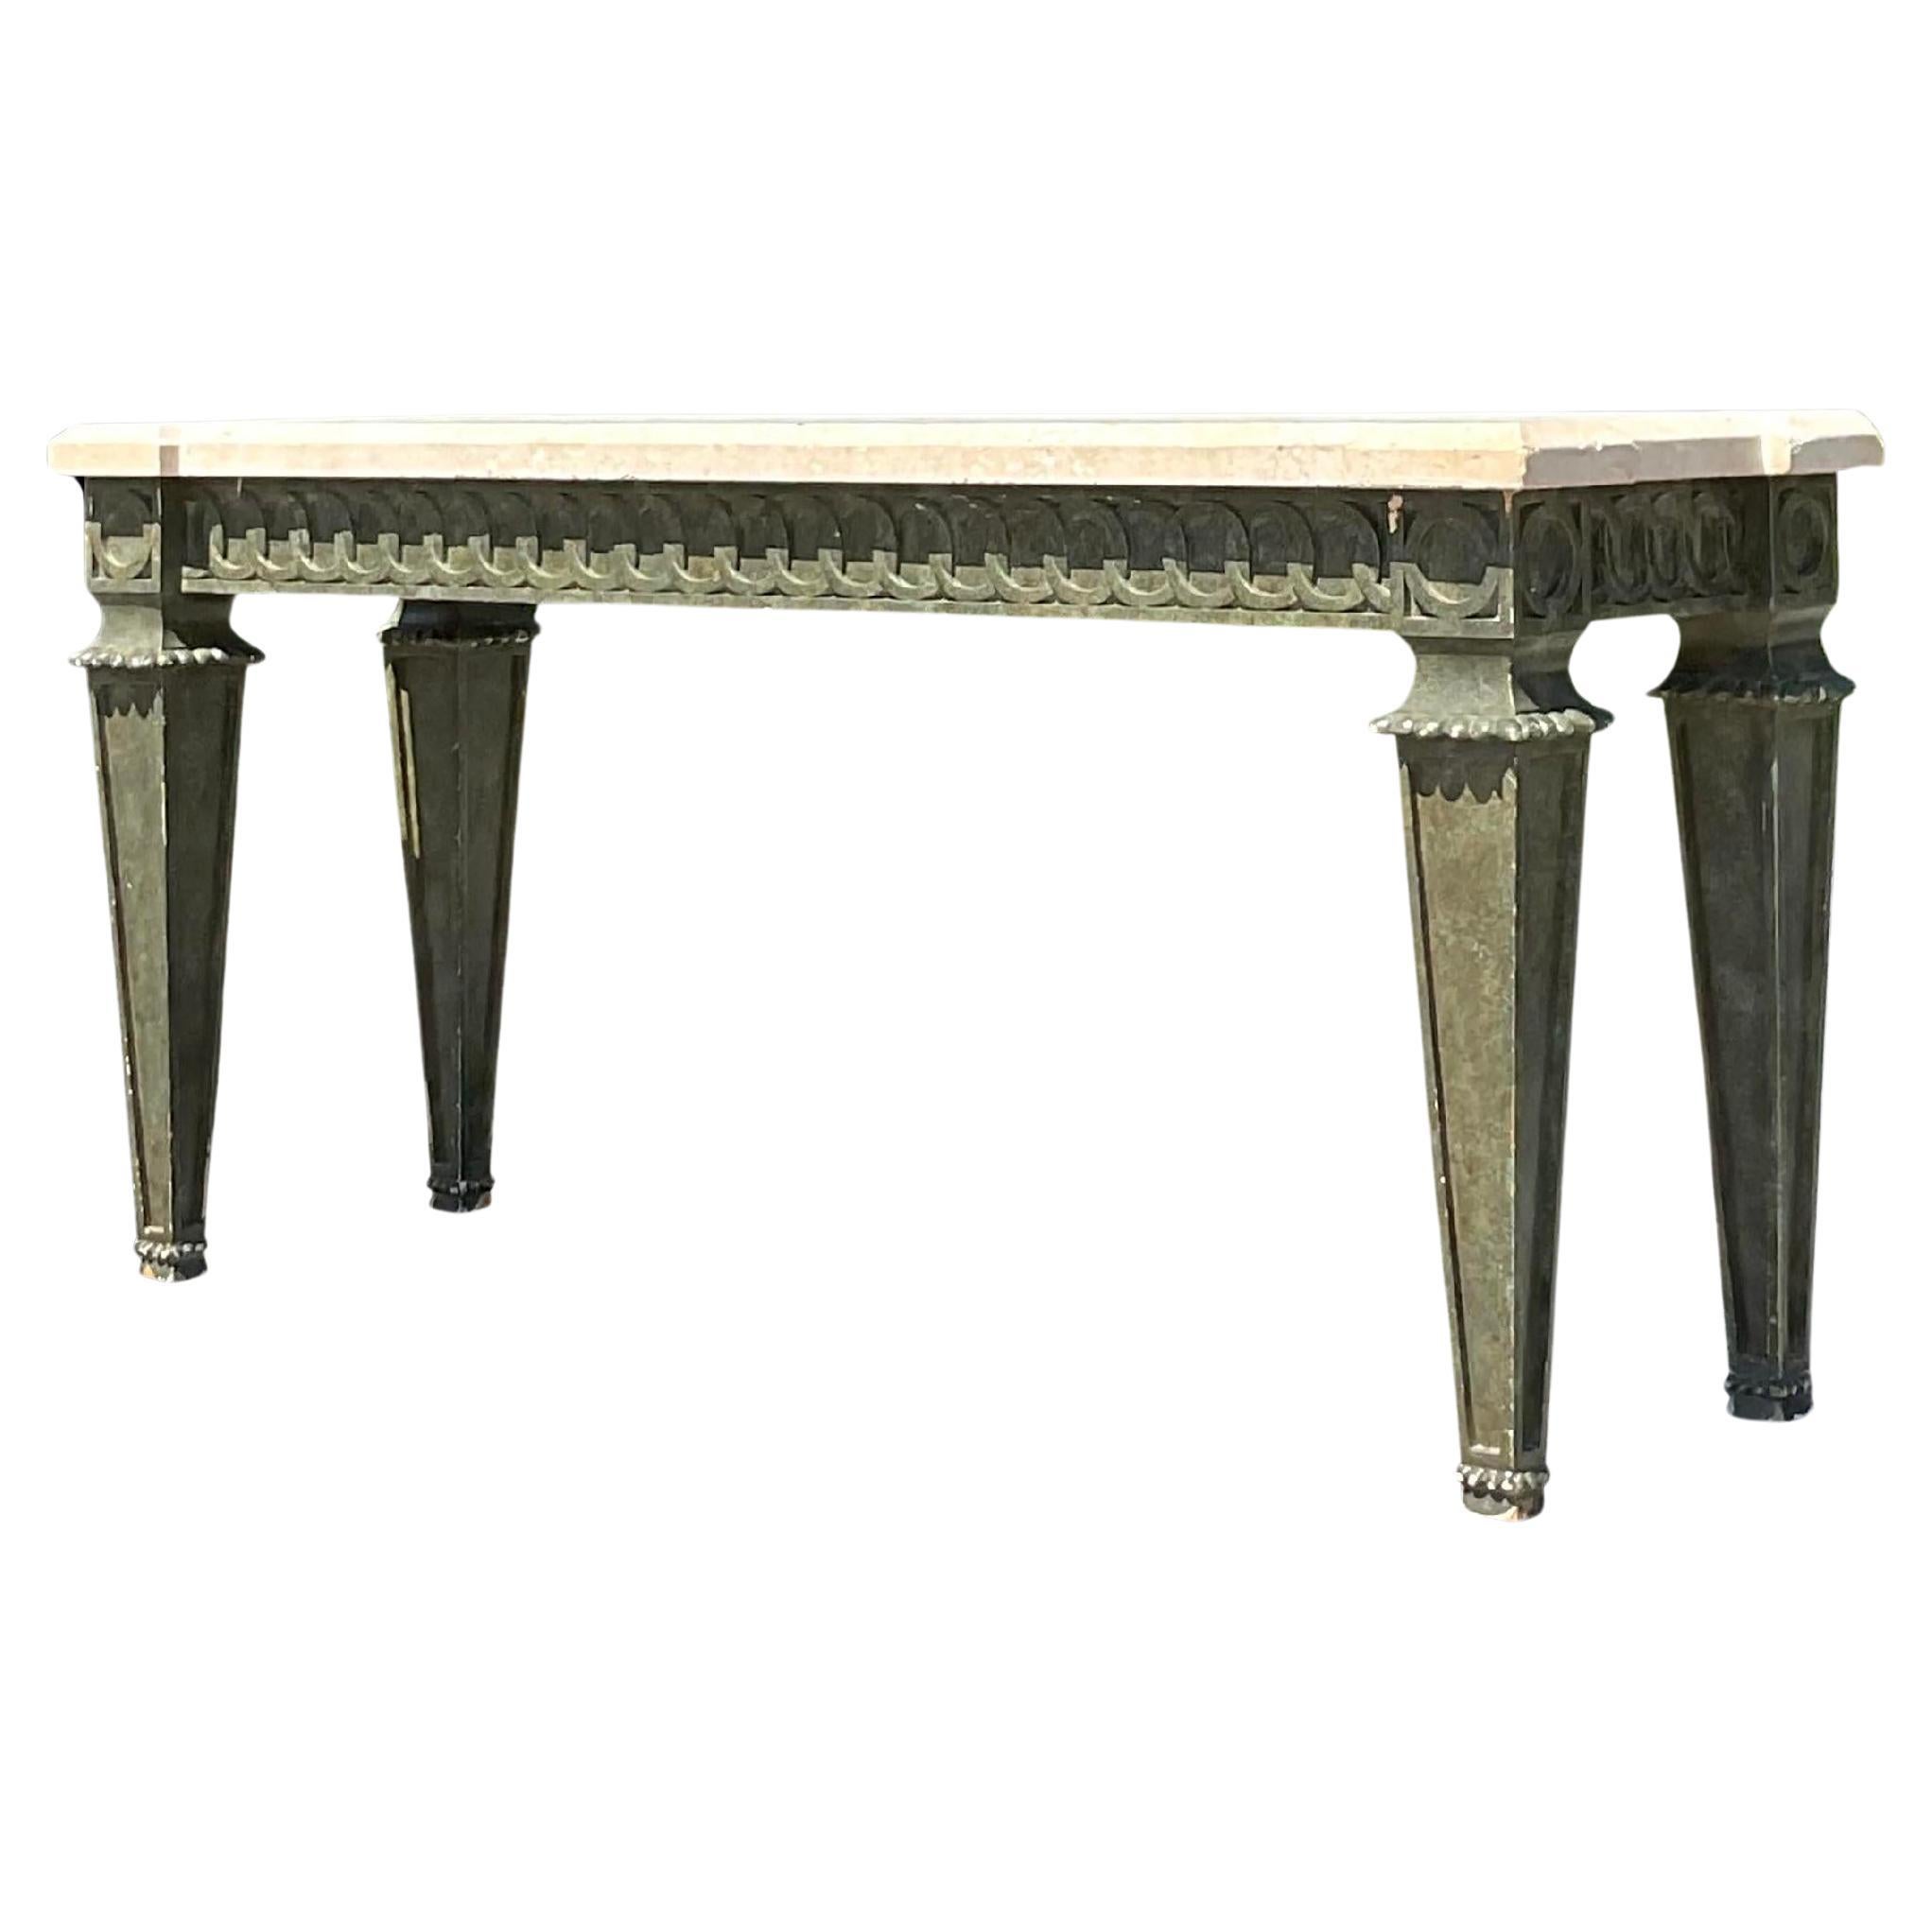 Mid 20th Century Boho Carved Rings Console Table From an Addison Mizner Estate